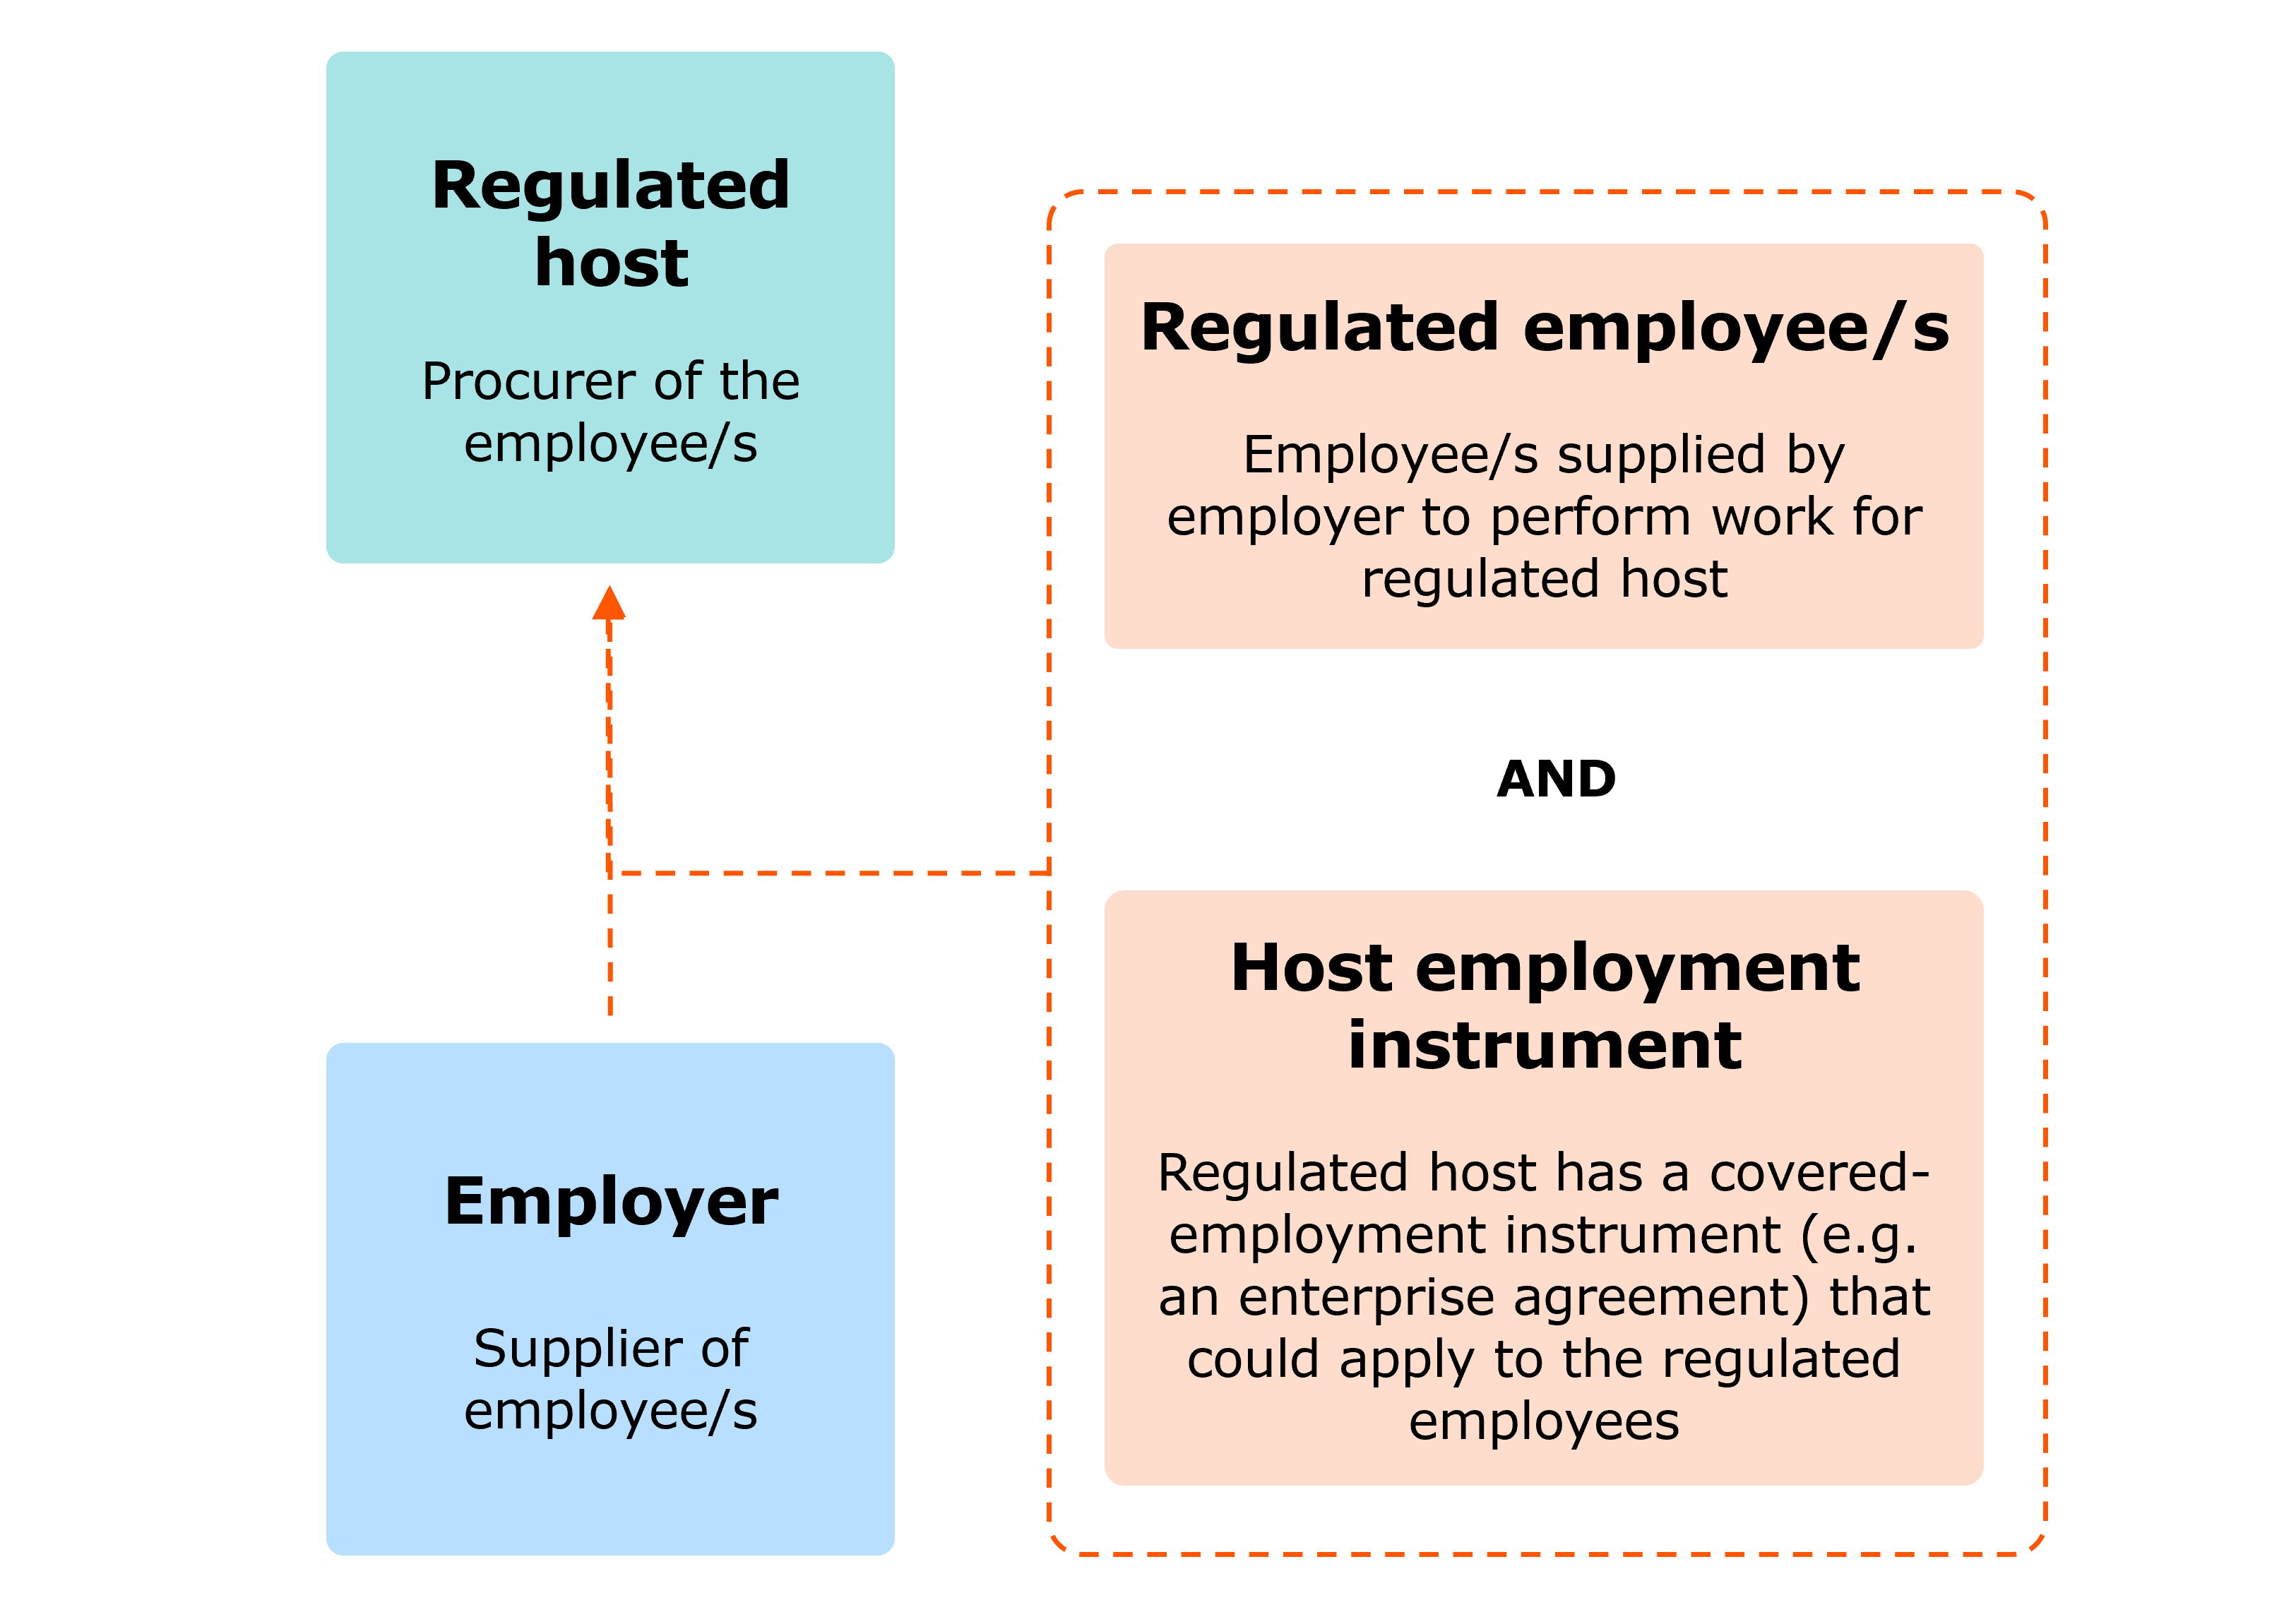 Image > Proposed changes to casual employment provisions 2